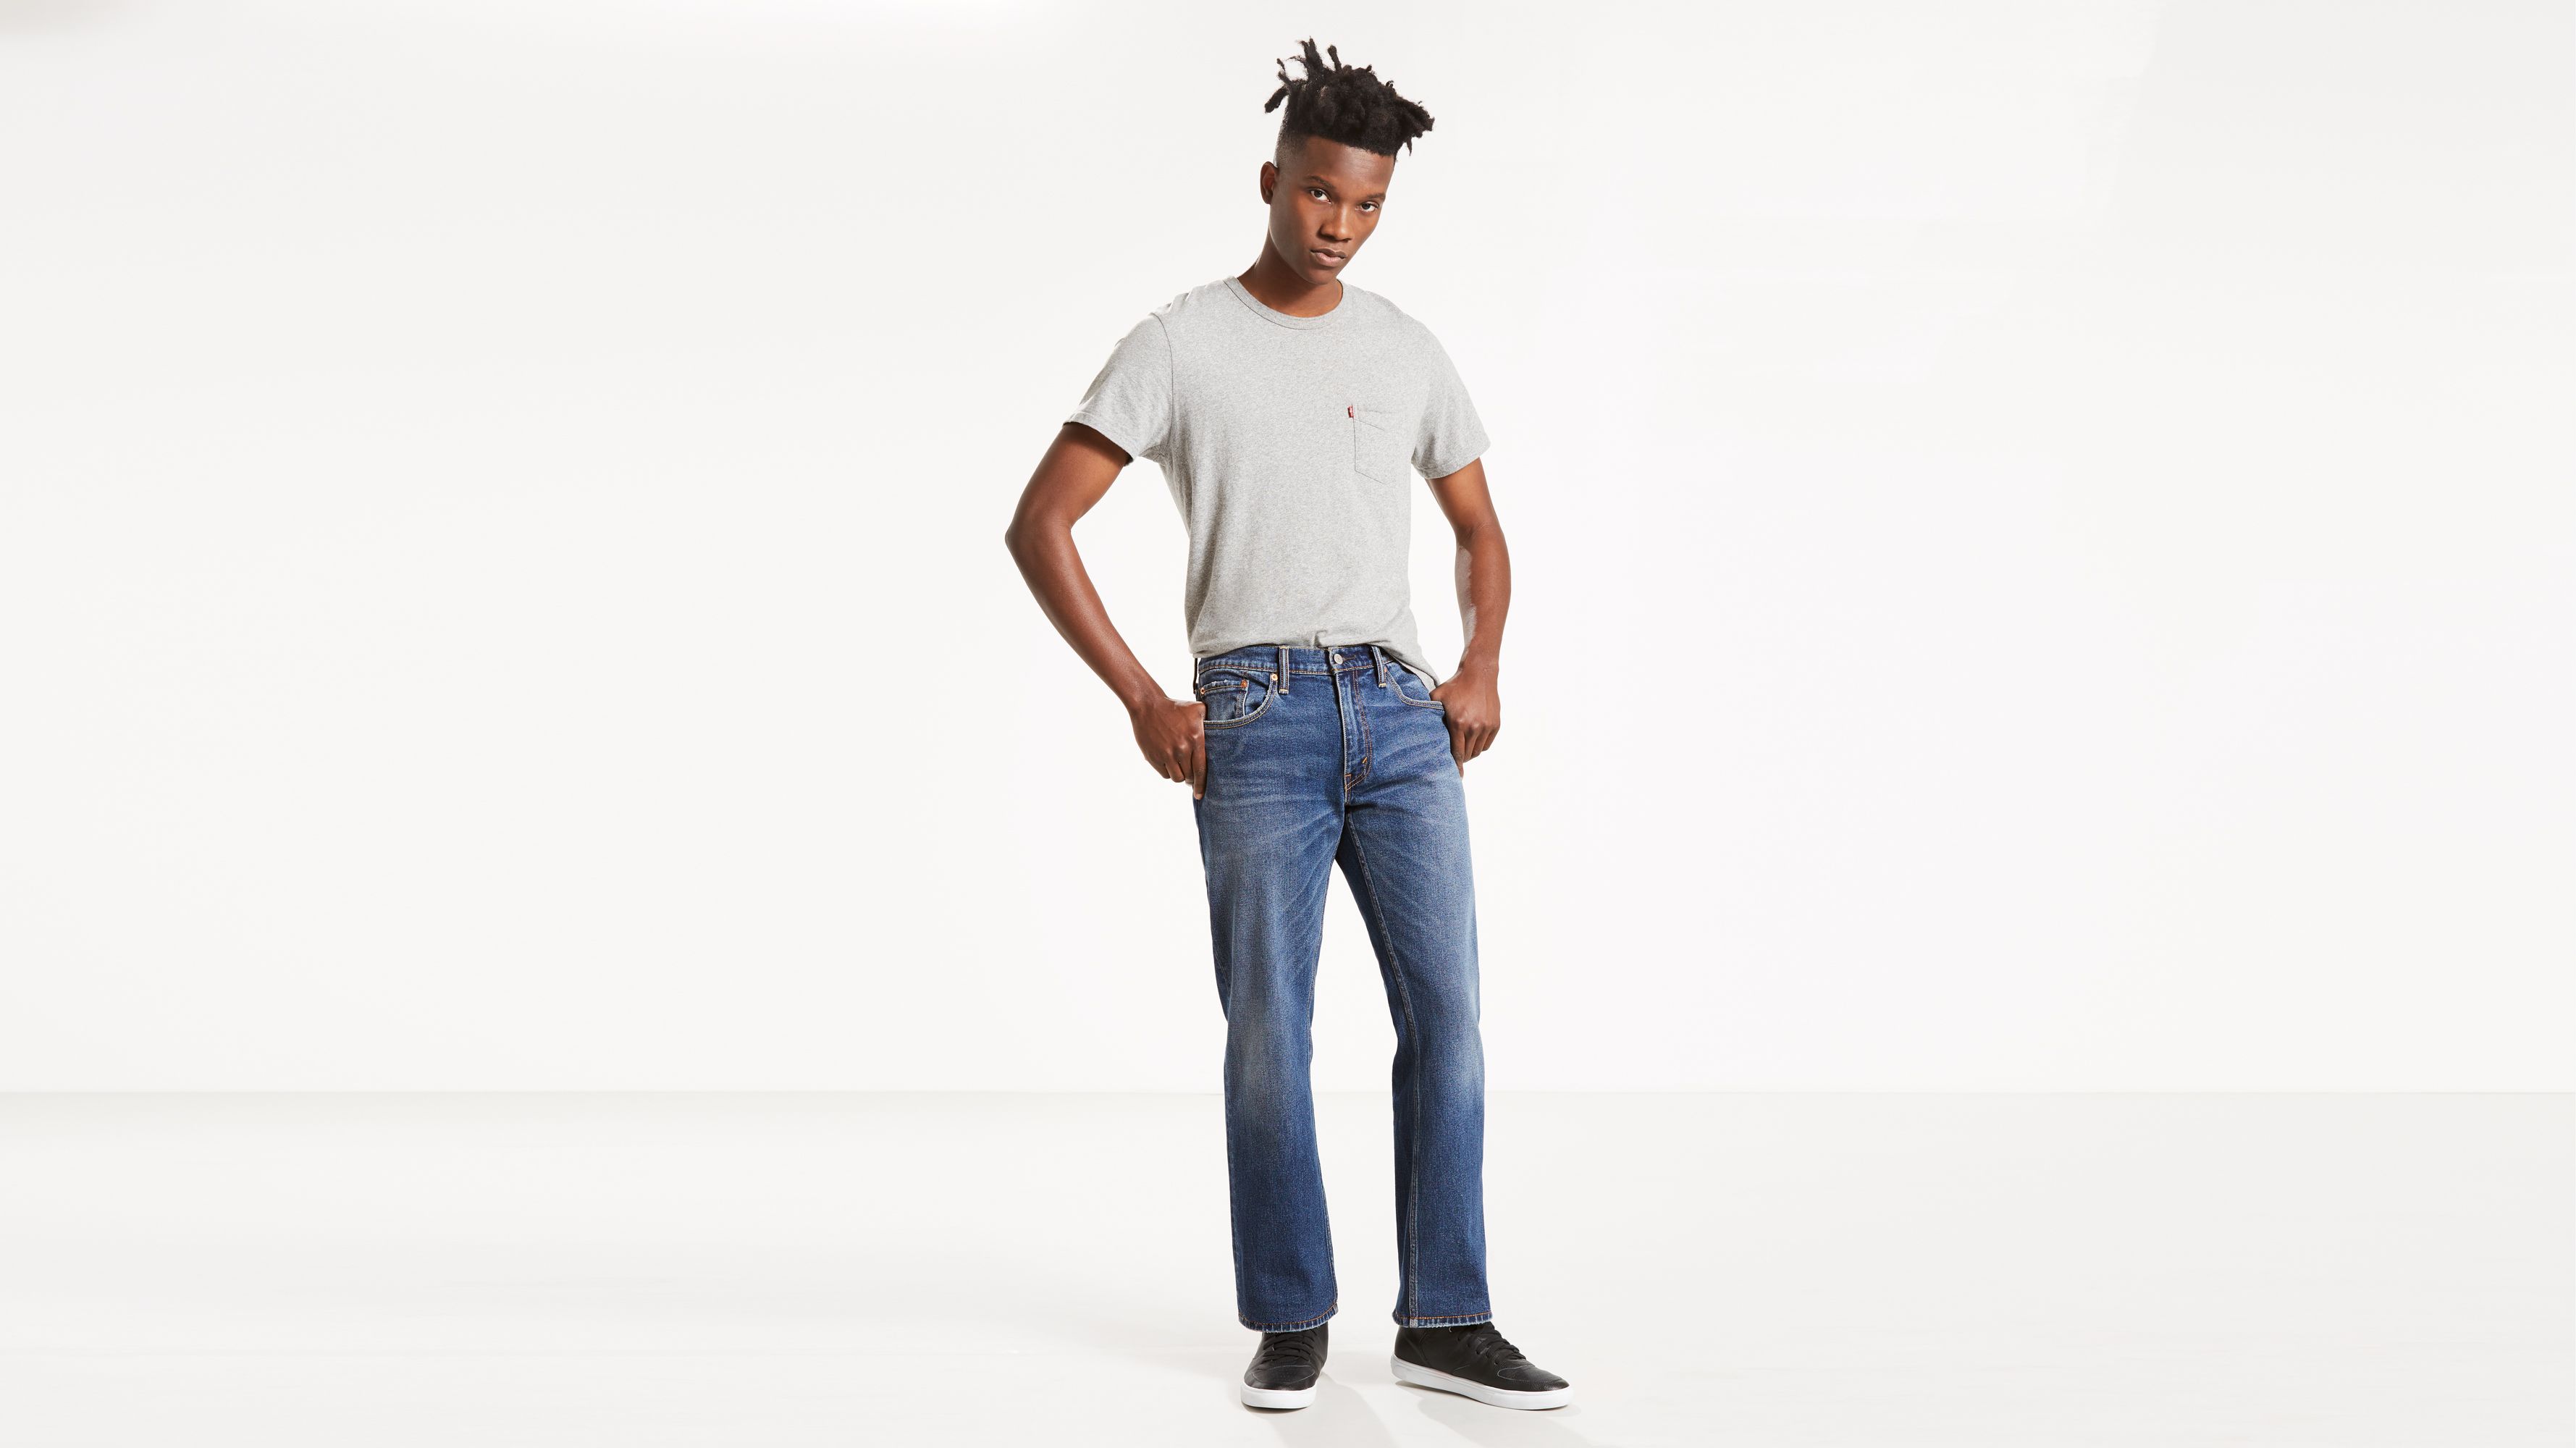 559 relaxed straight jeans